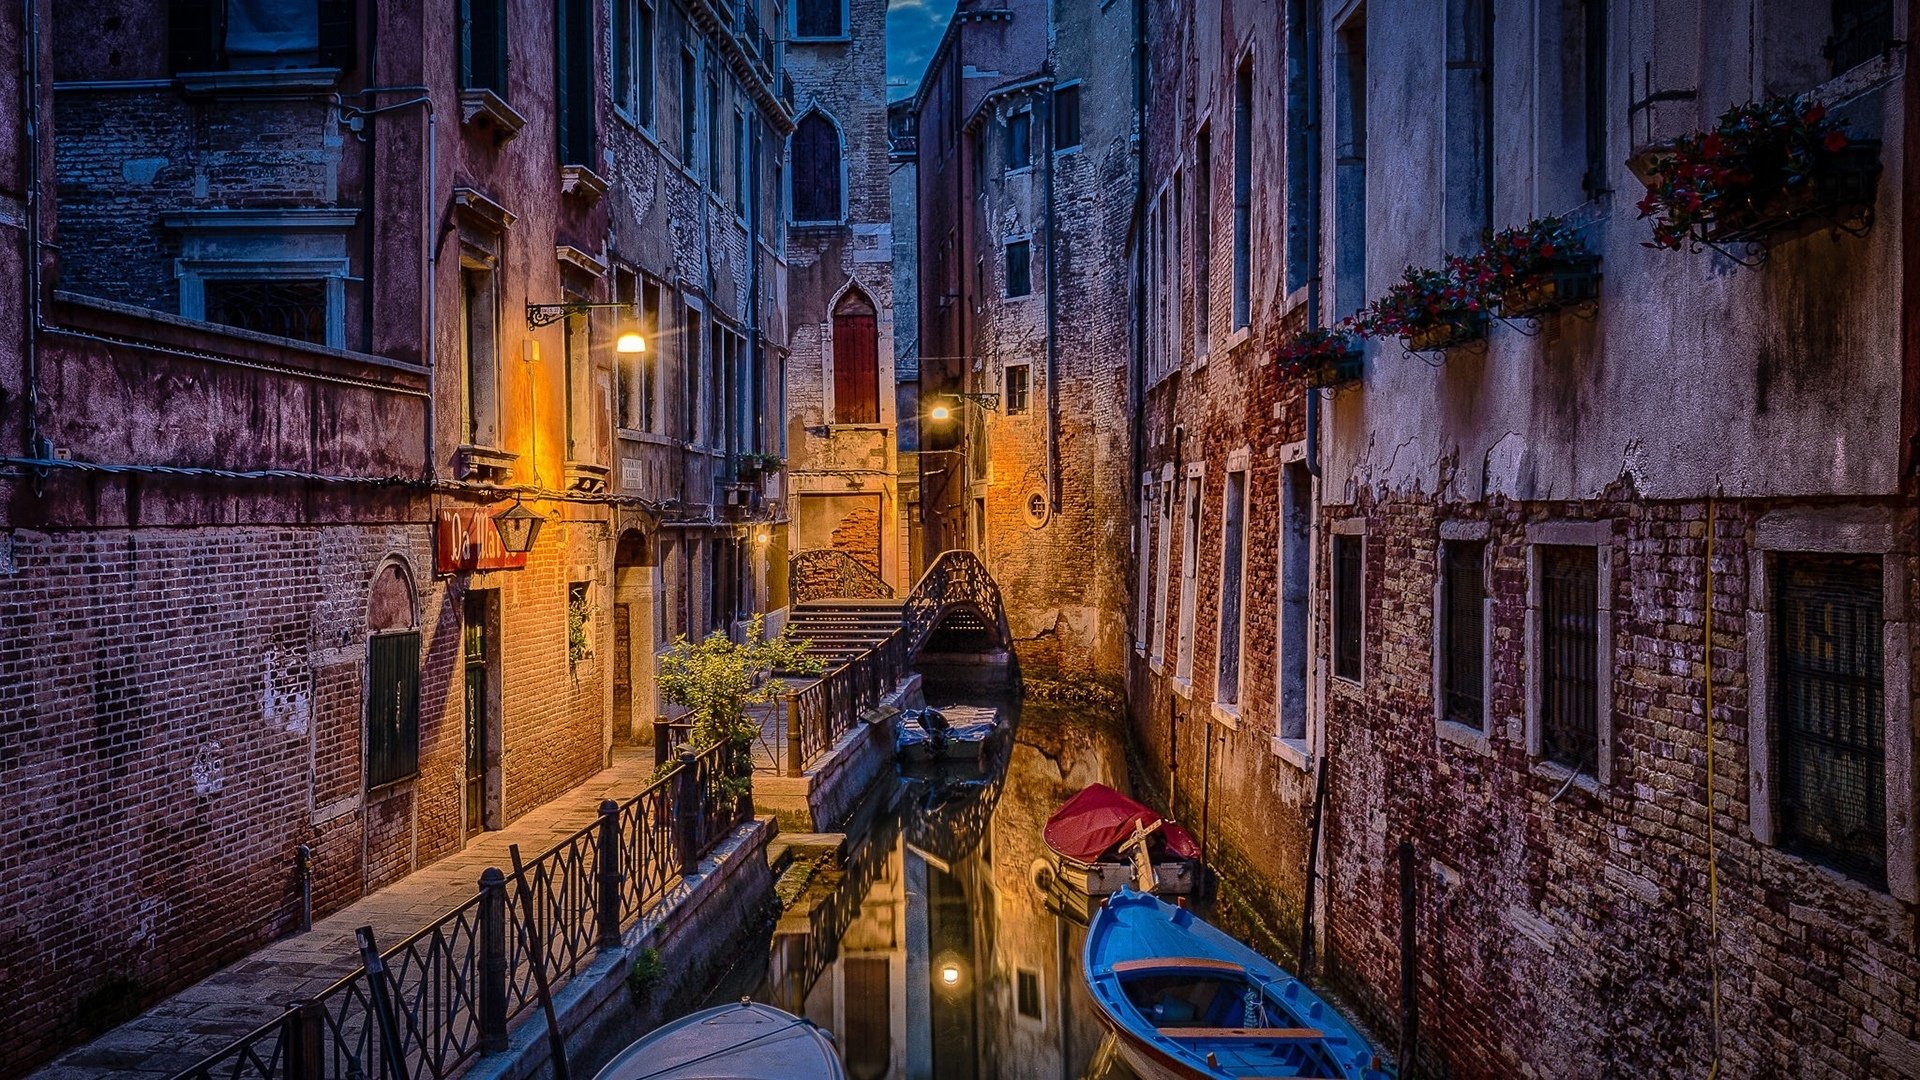 Canal in Venice at Night HD Wallpaper Background Image